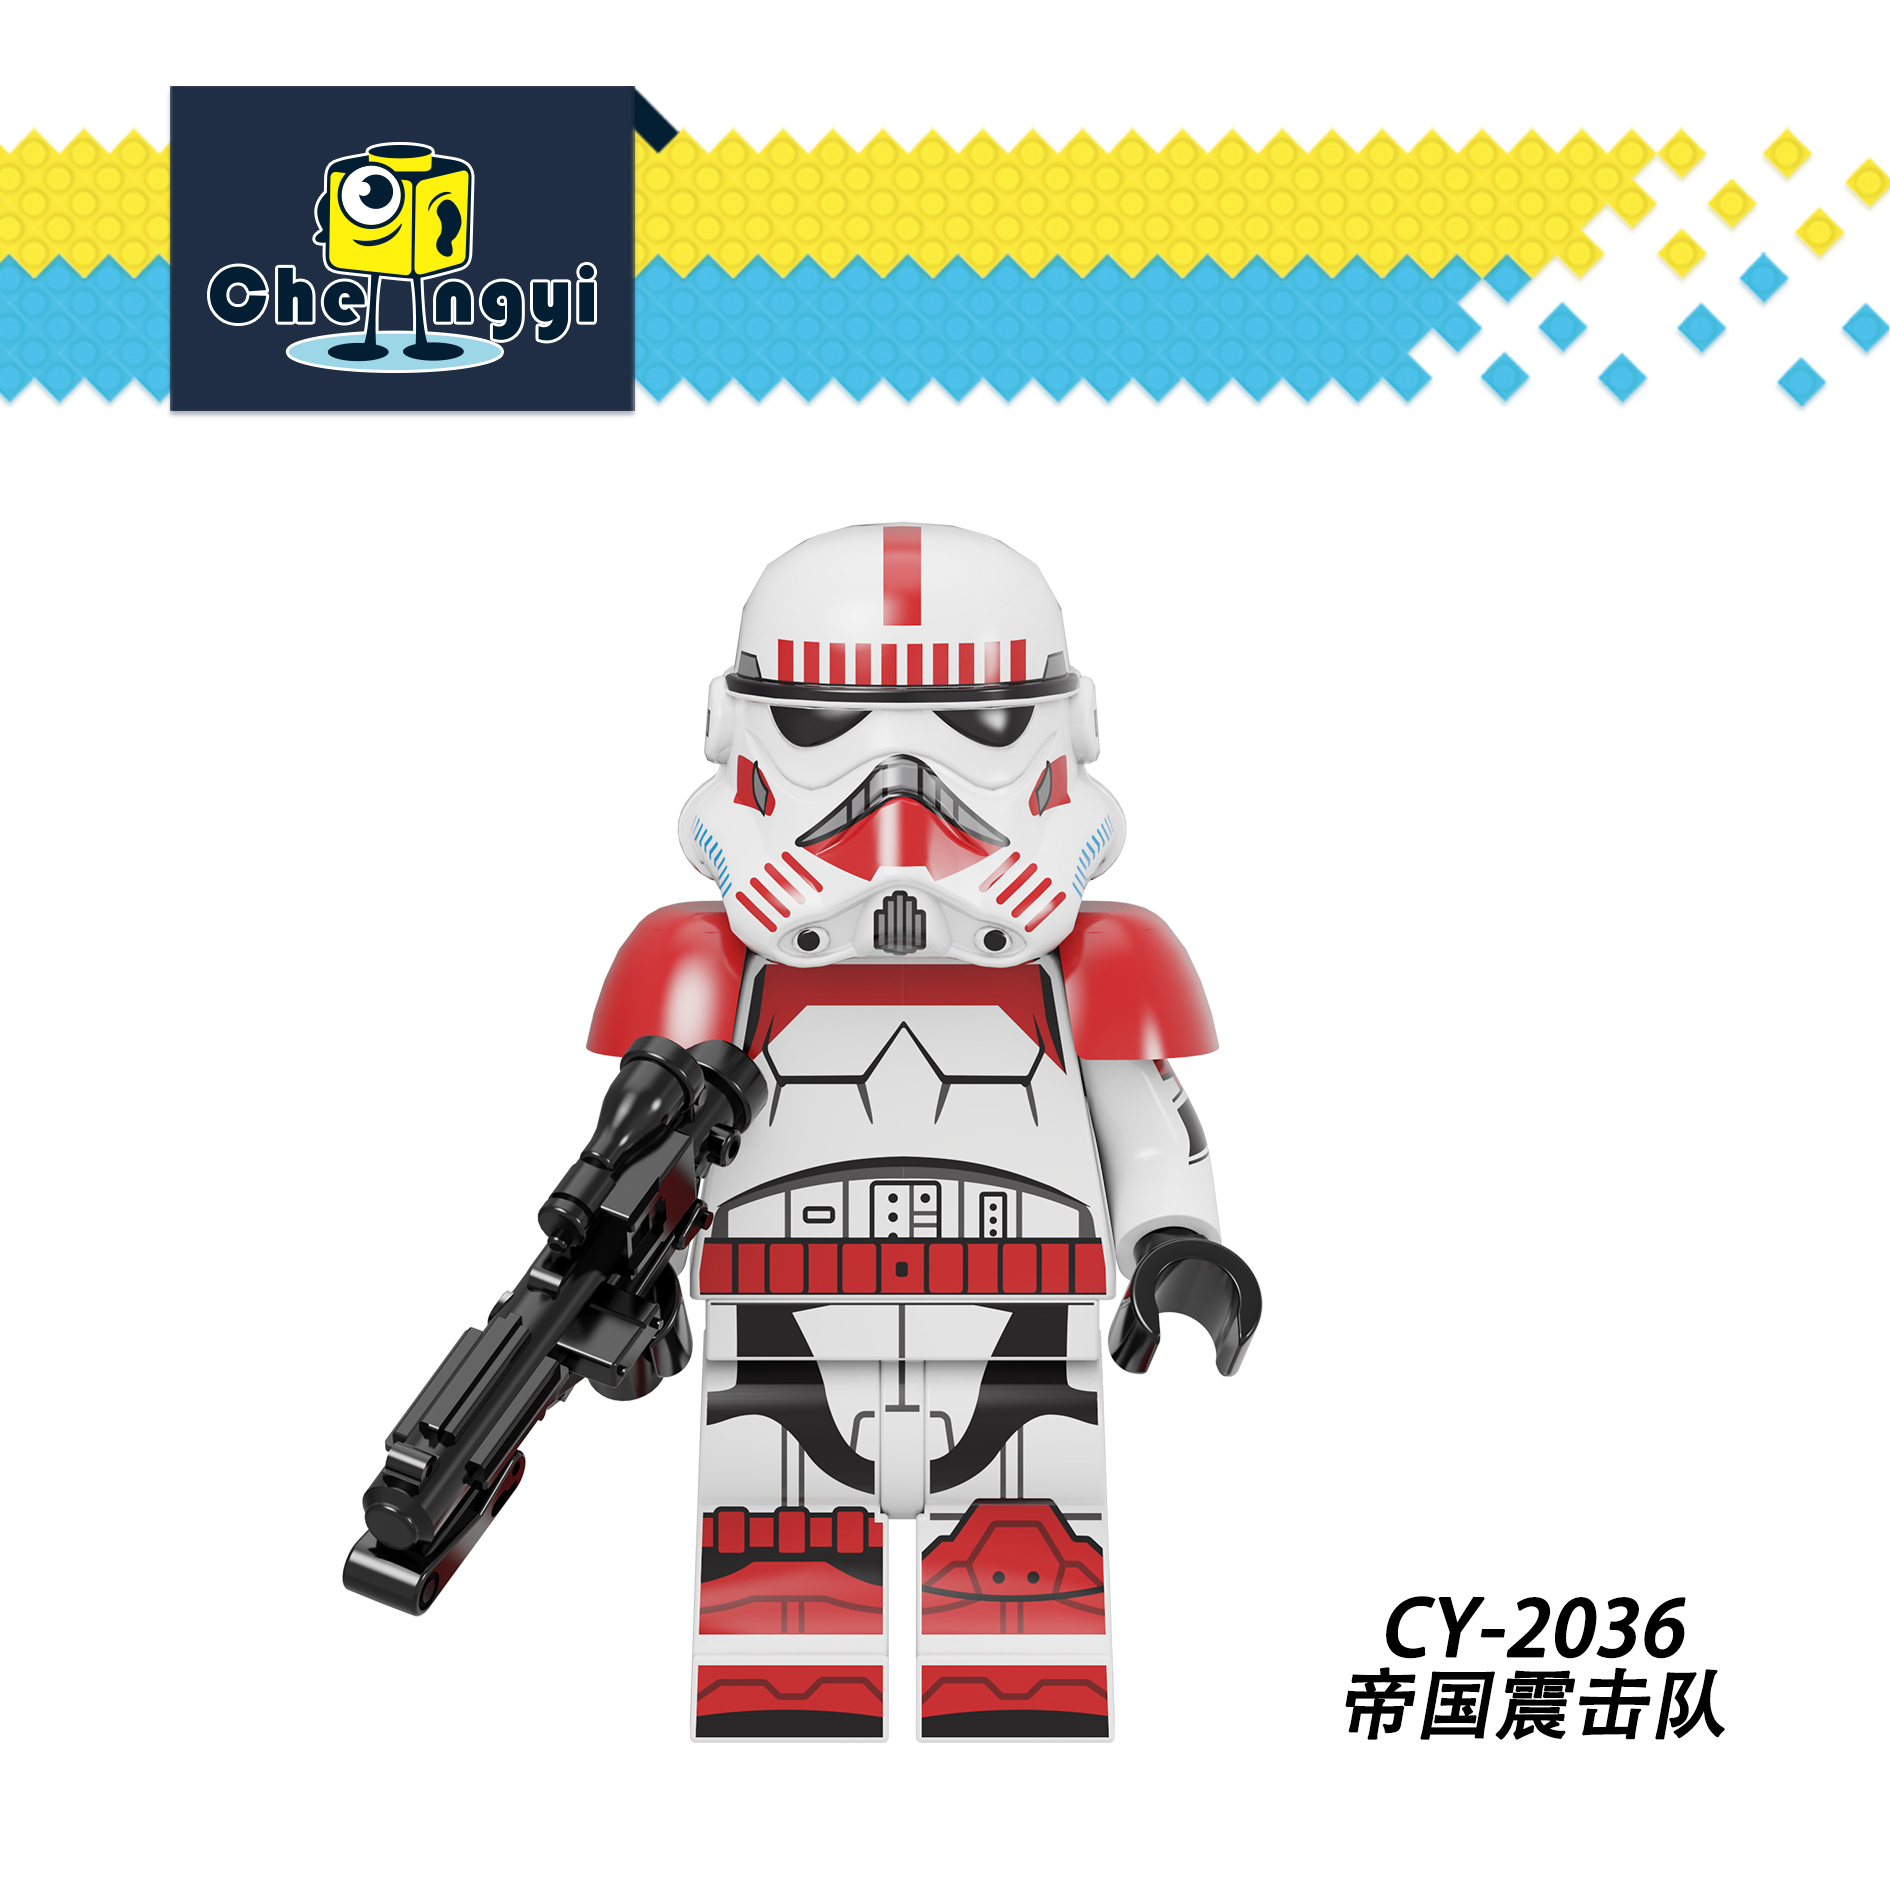 CY2031 CY2032 CY2033 CY2034 CY2035 CY2036 CY2037 CY2038 CY8005 Star Wars Storm Strooper Building Blocks Bricks Movie Series Action Educational Toys for Kids Gifts 